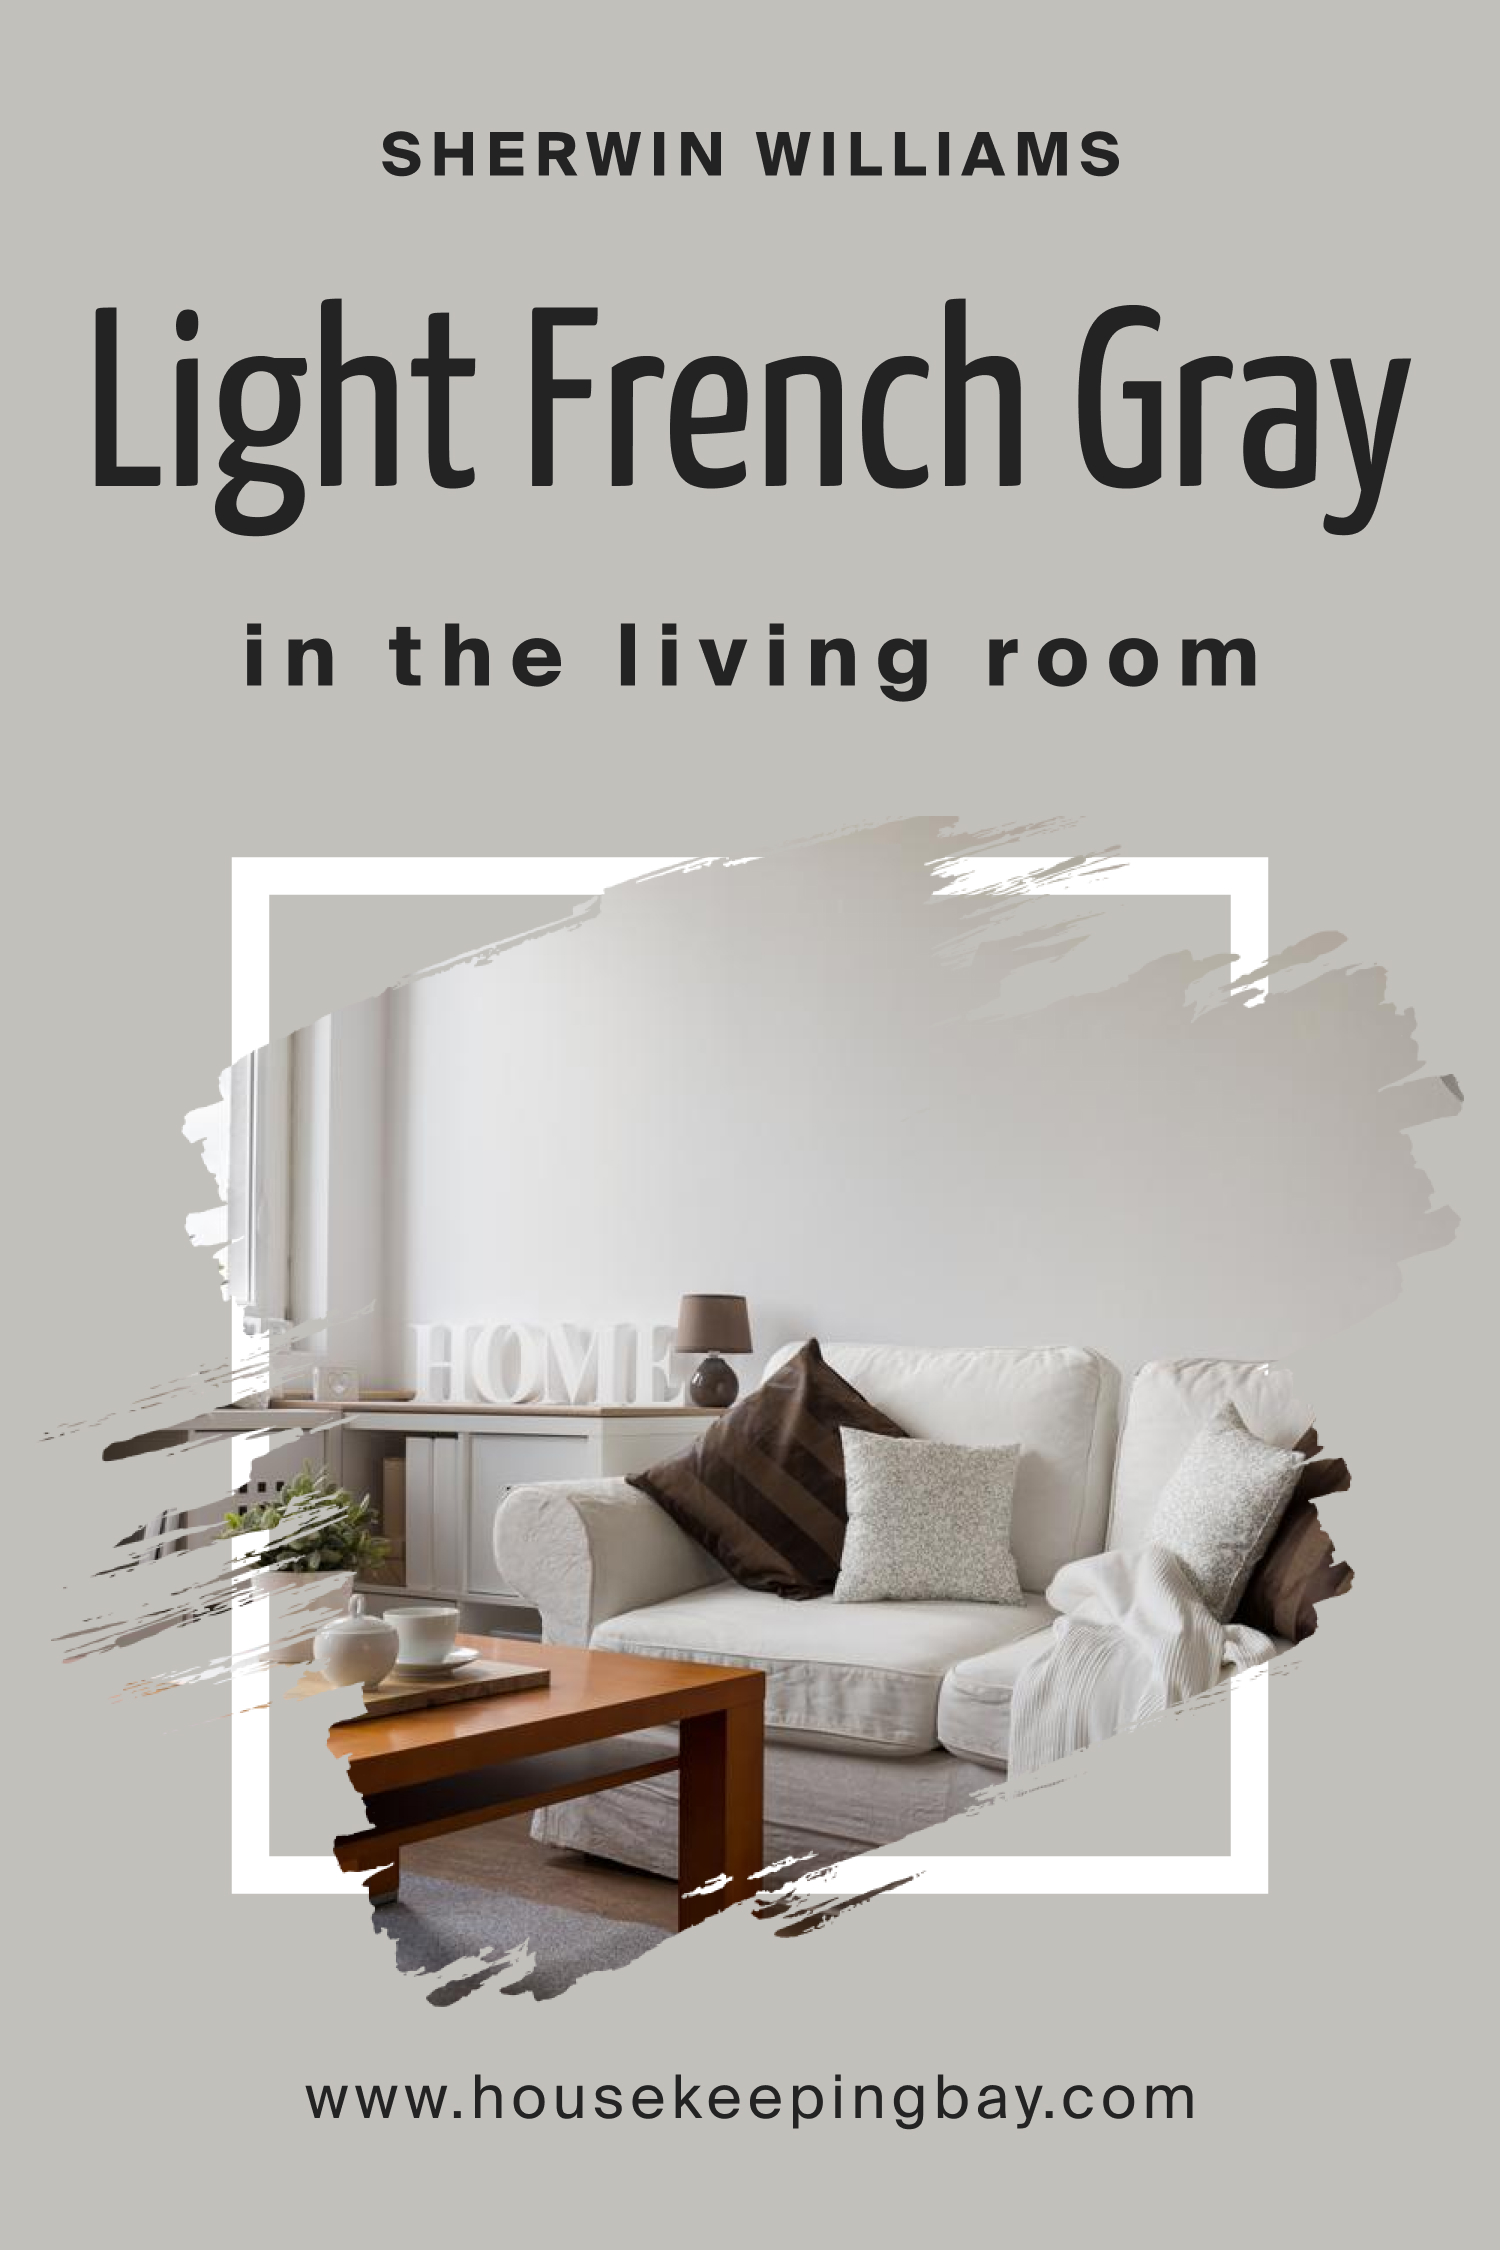 Sherwin Williams.Light French Gray In the Living Room